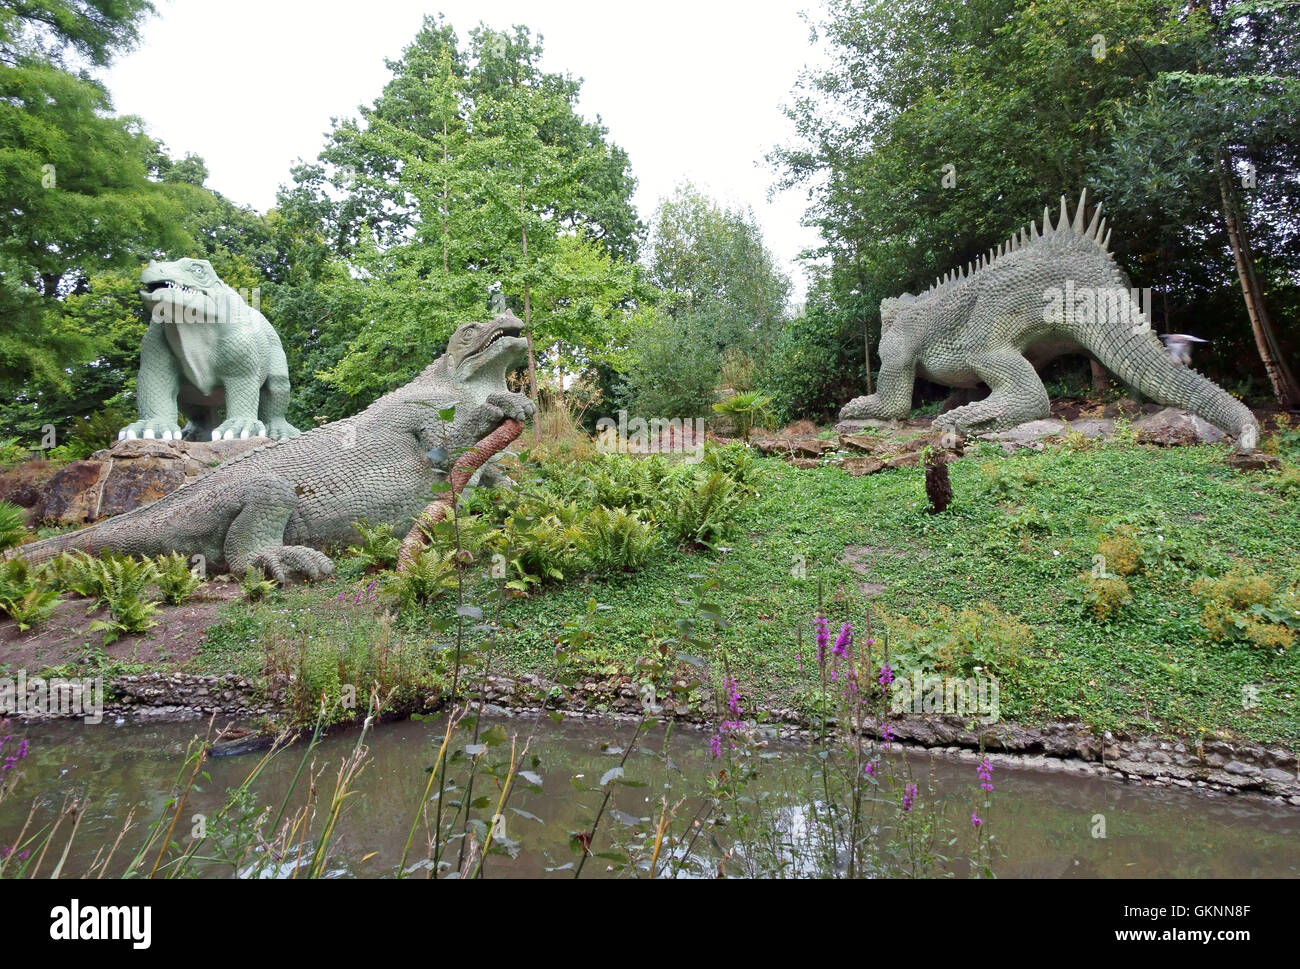 Dinosaur figures in Crystal Palace Park, South London Stock Photo